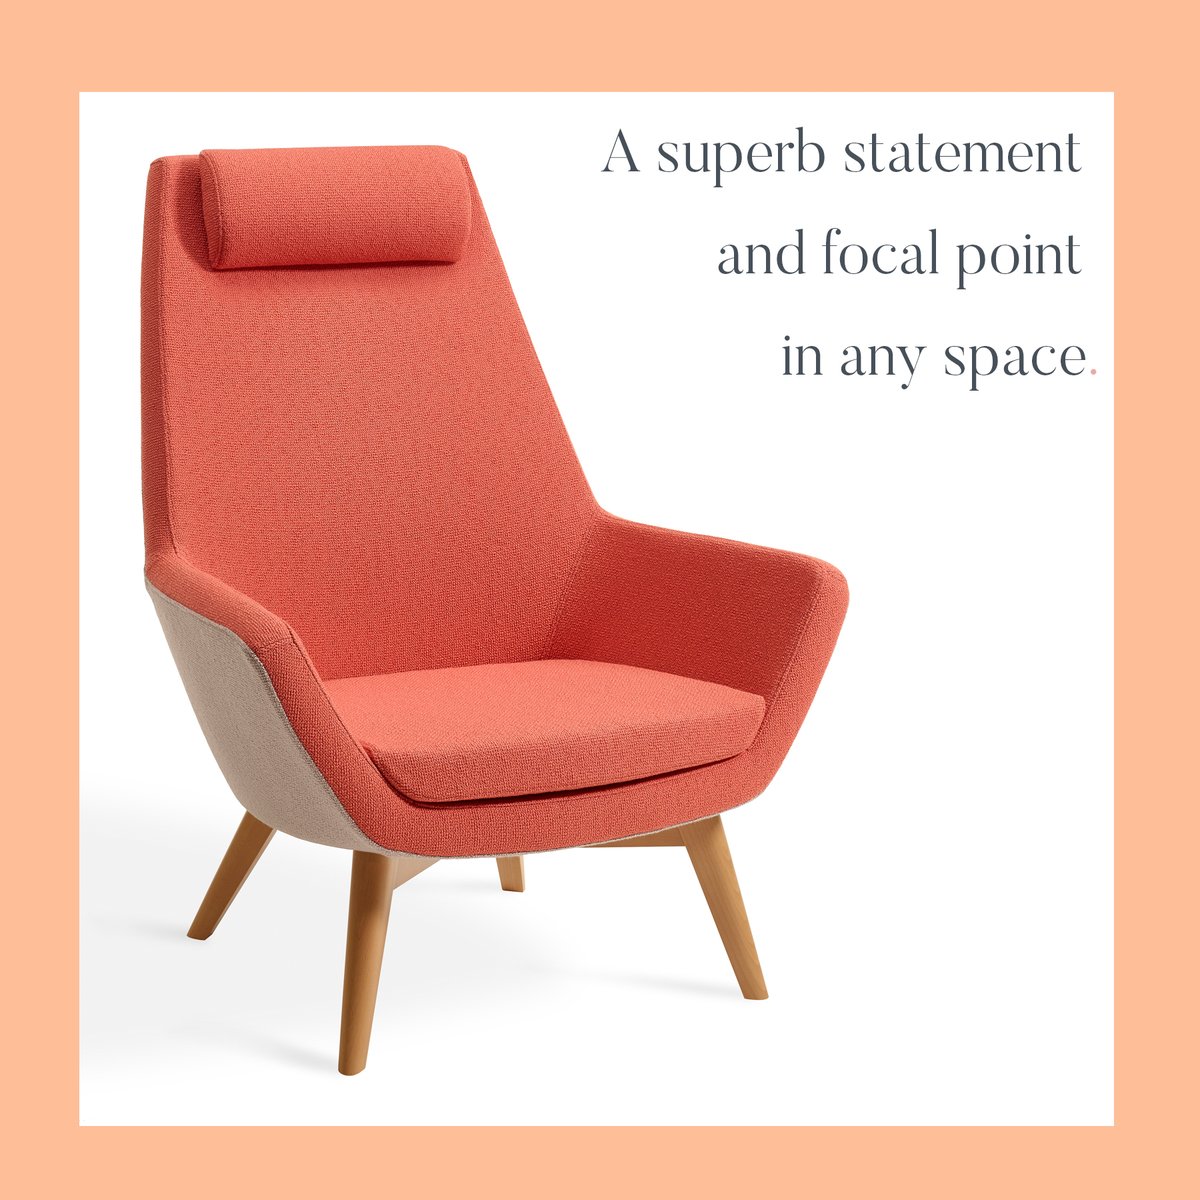 A superb statement and focal point in any space Bjorn and Benny @vercodesign #vercodesign

#furniture #workplacedesign #design #architecture #architectslondon #interiordesign #photography #londondesign #madeinbritain #clerkenwelldesignweek #cdw2024